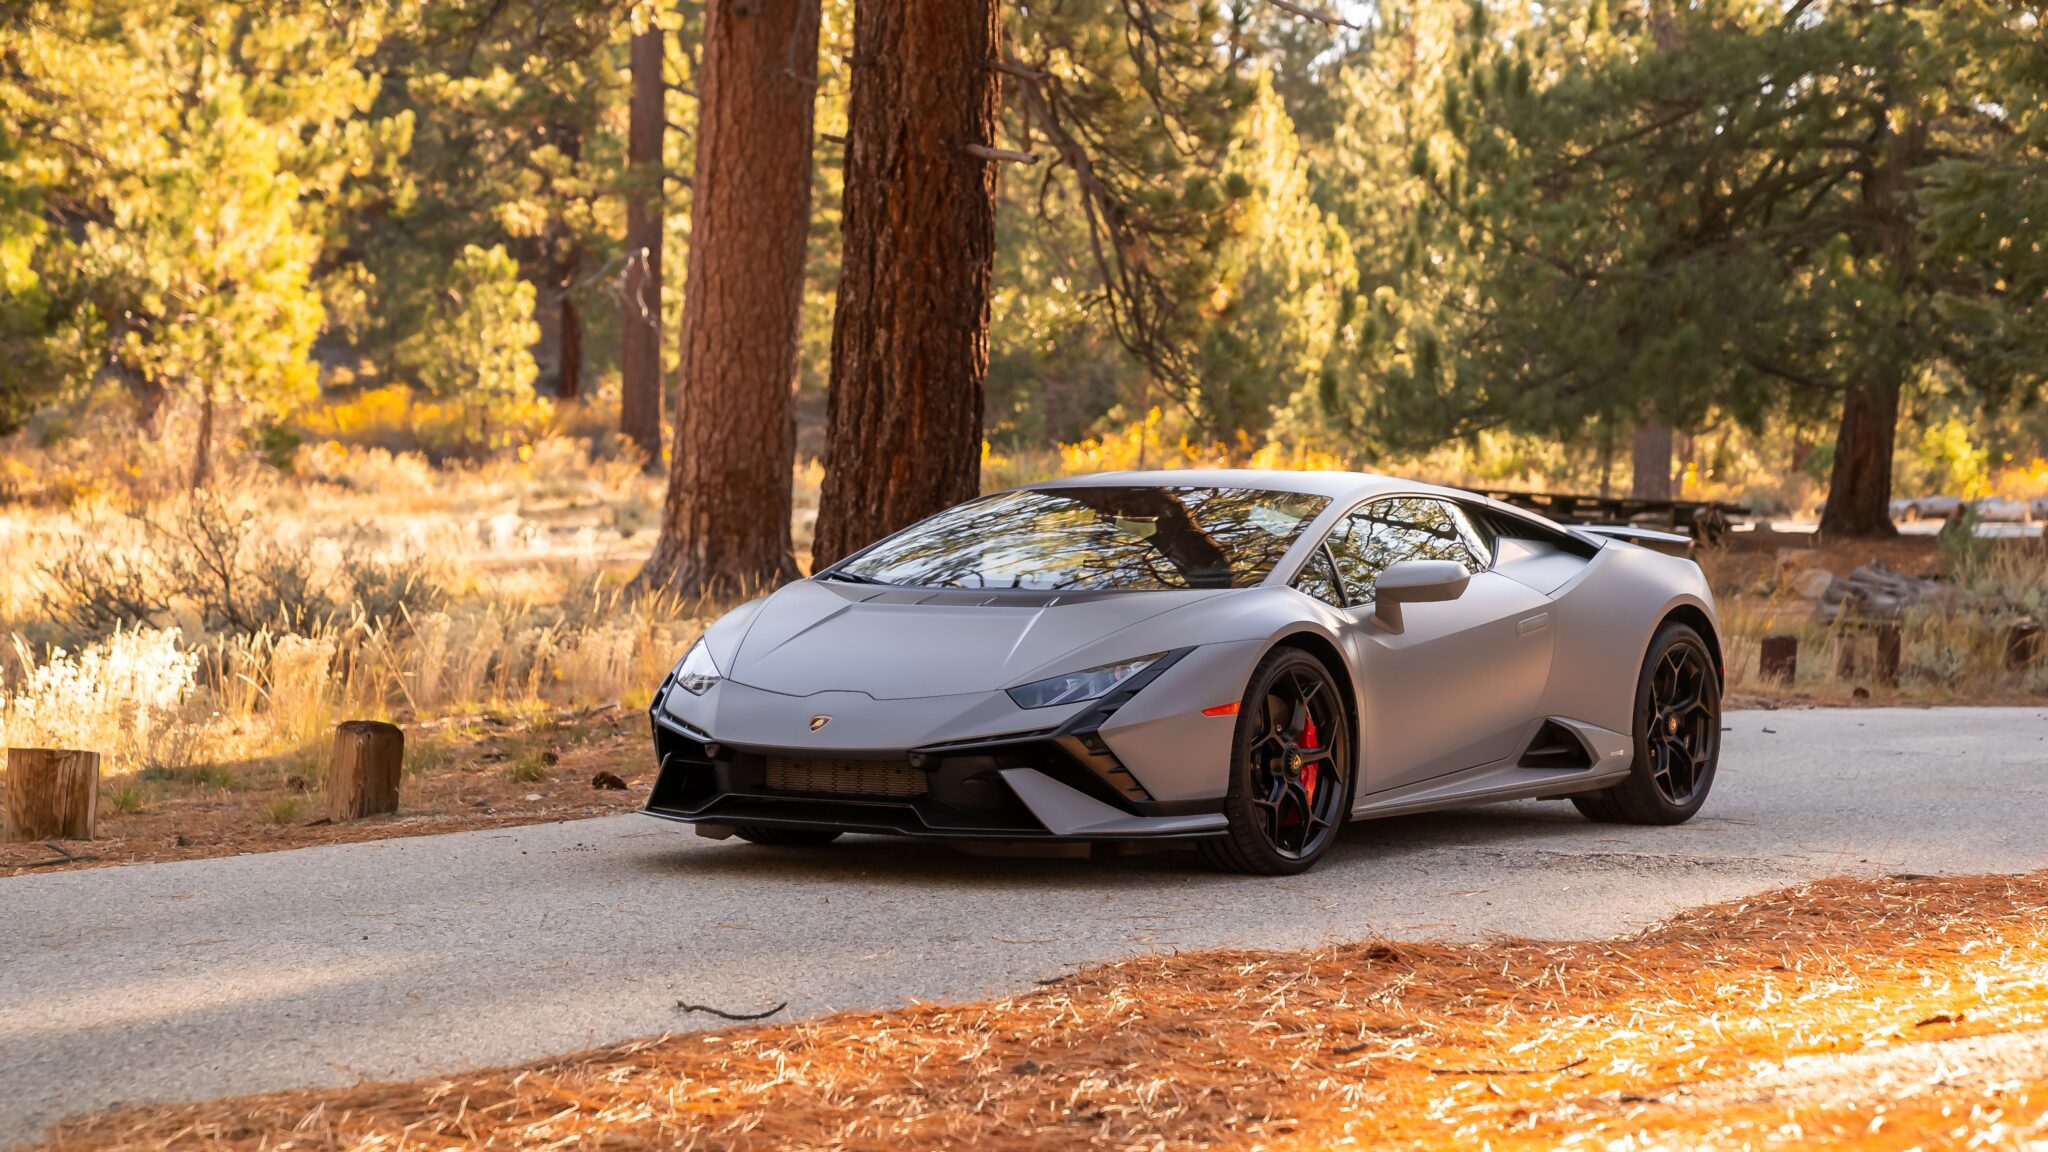 An image of a Lamborghini Huracan Tecnica parked outdoors.